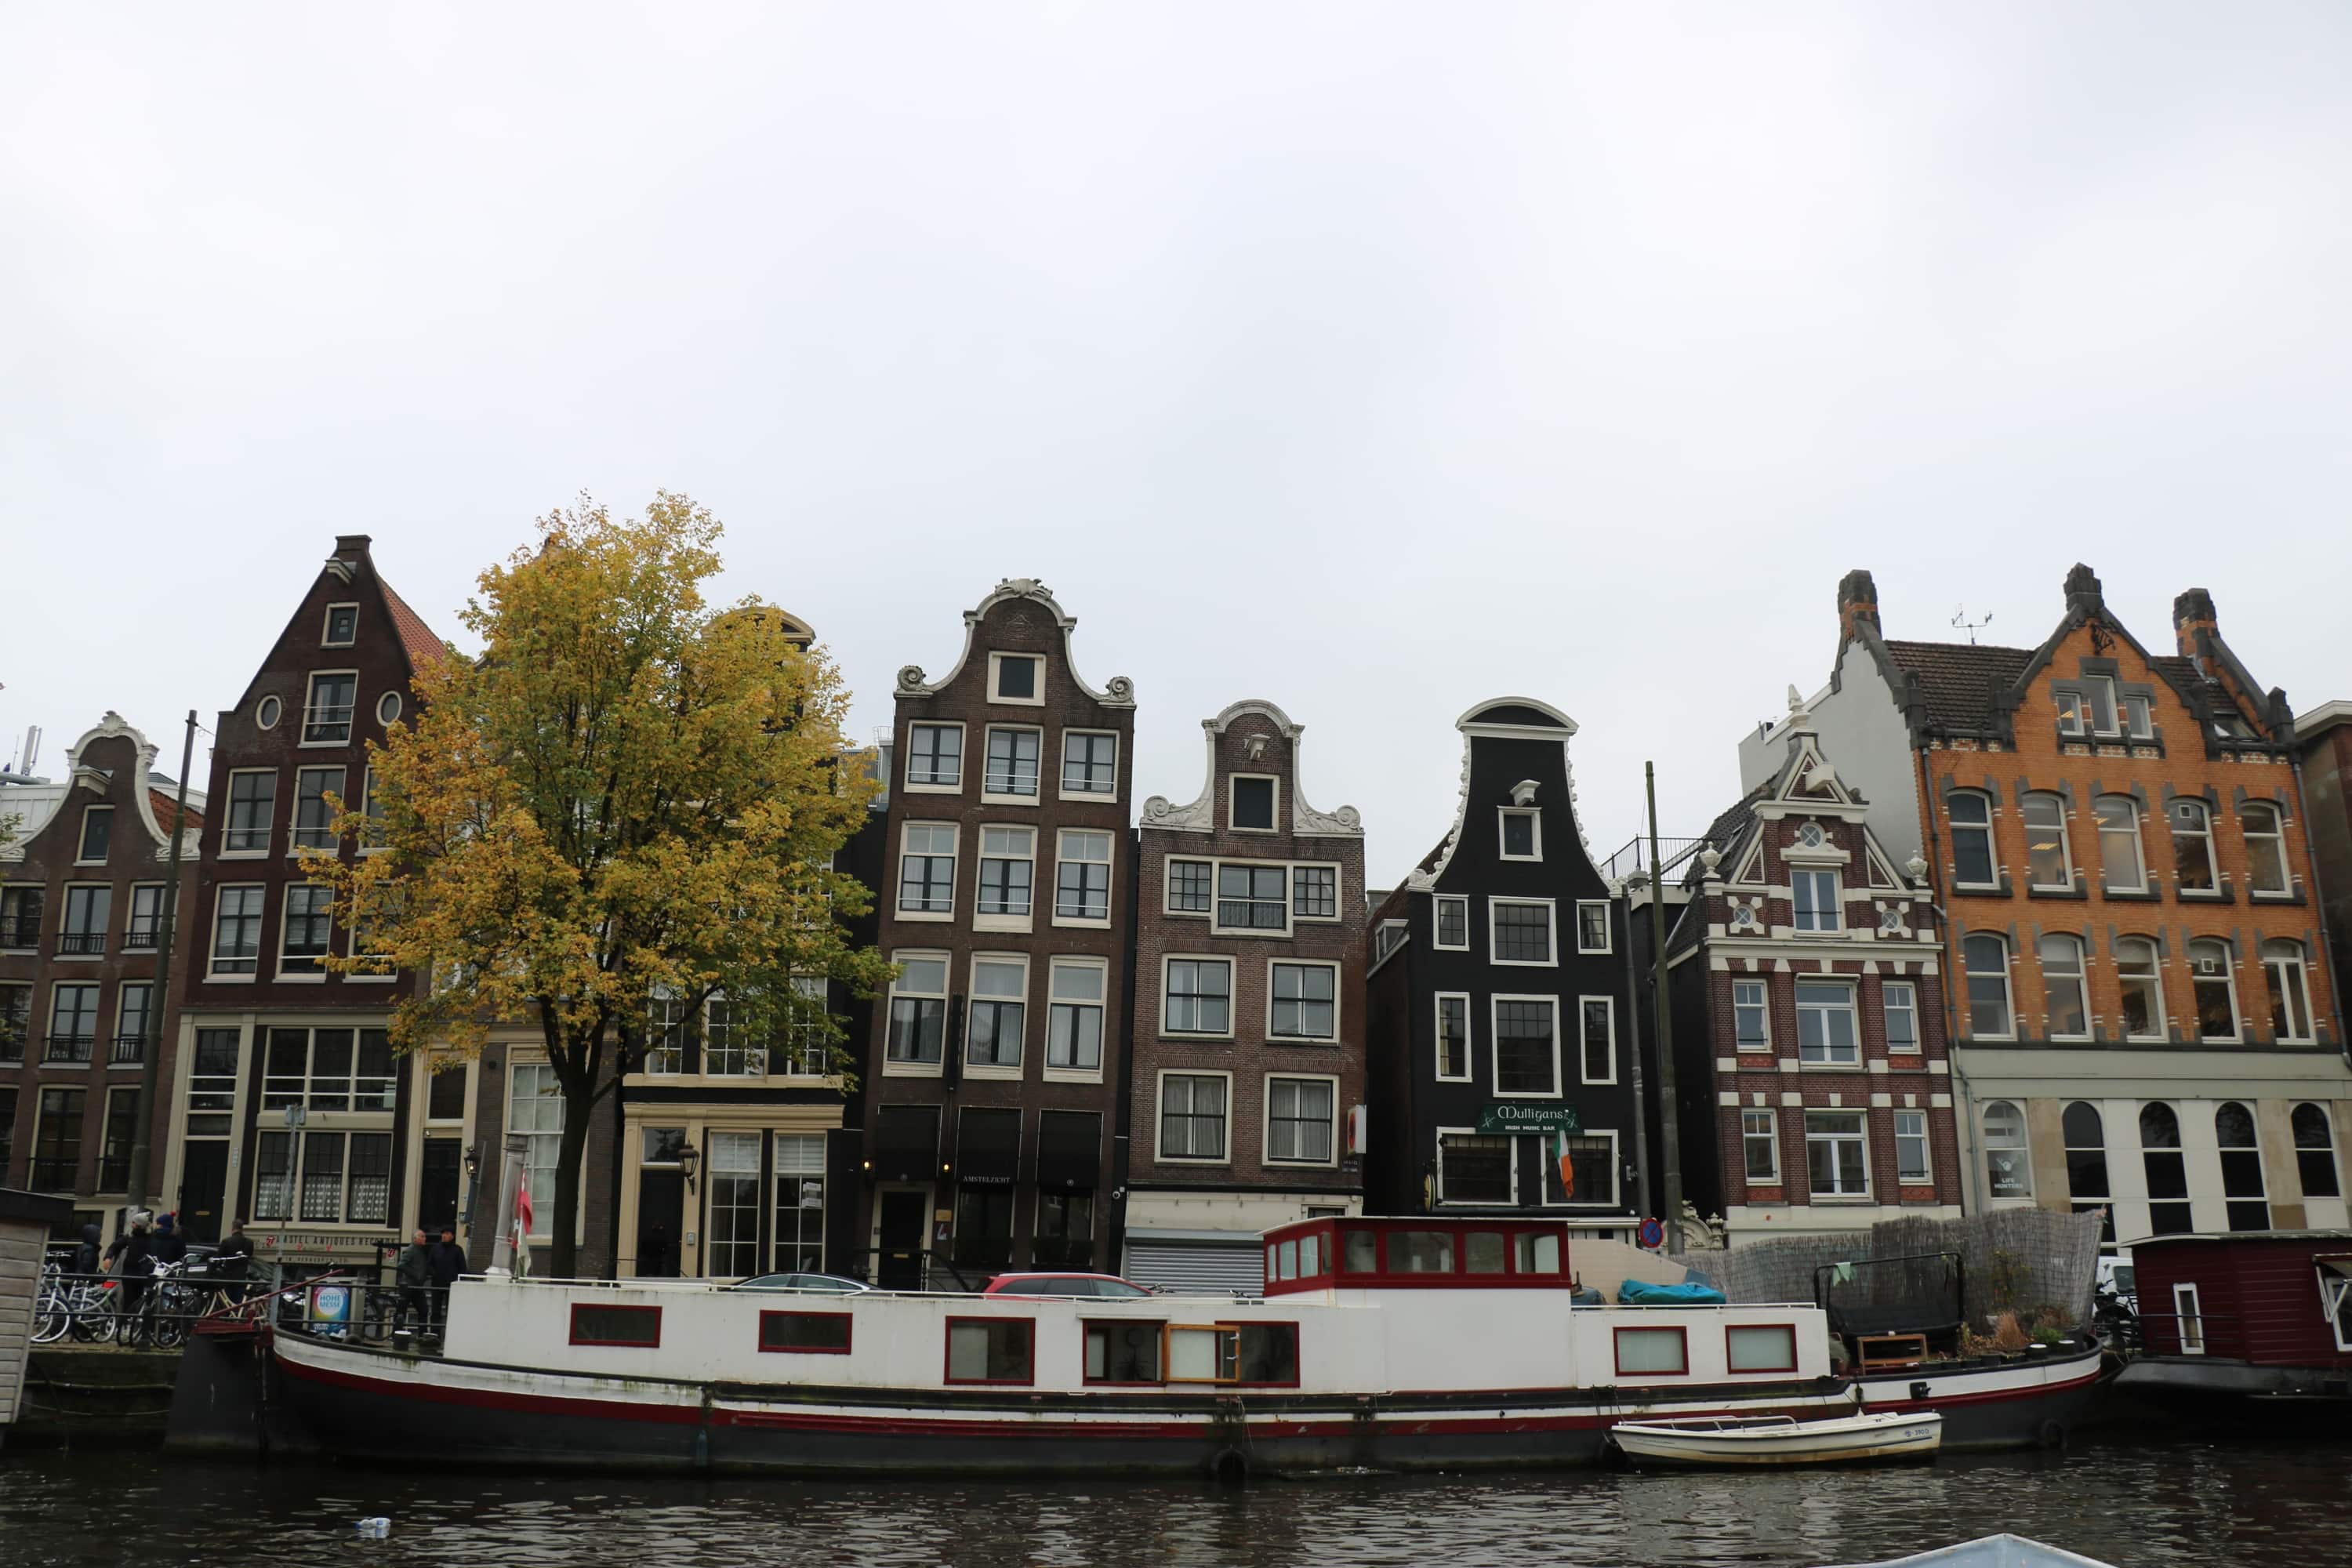 Leaning Dutch houses lining one of Amsterdam's canals.